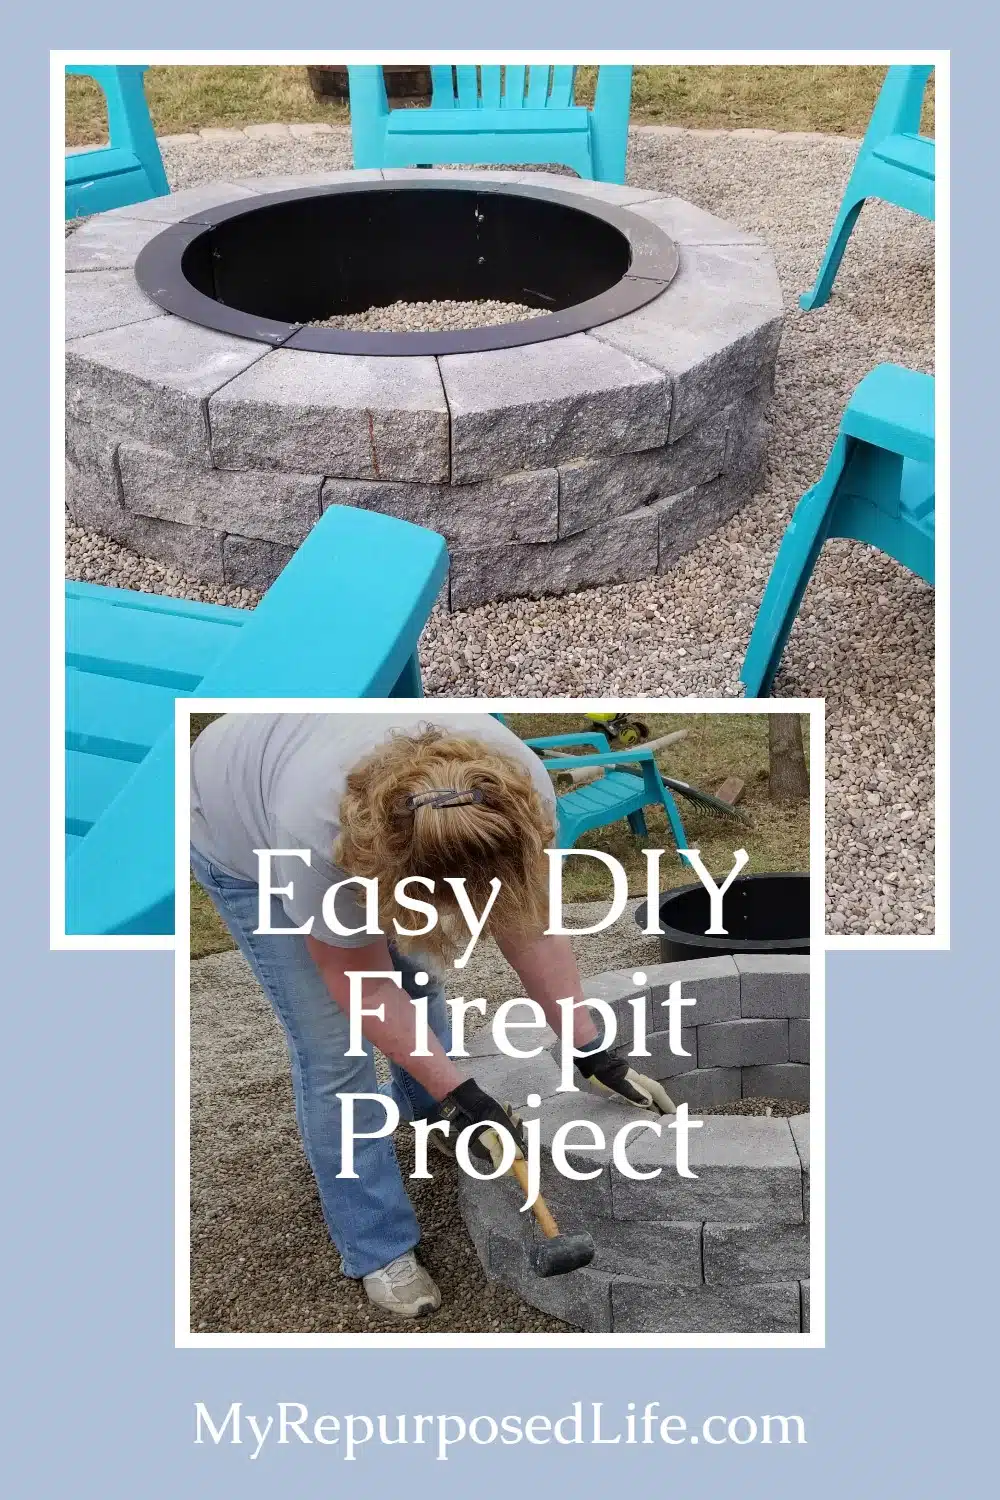 How to easily make a firepit for your backyard with these step by step directions. If a couple of grandmas can do this, so can you! You got this, do it yourself to make it customized to what you want. #MyRepurposedLife via @repurposedlife